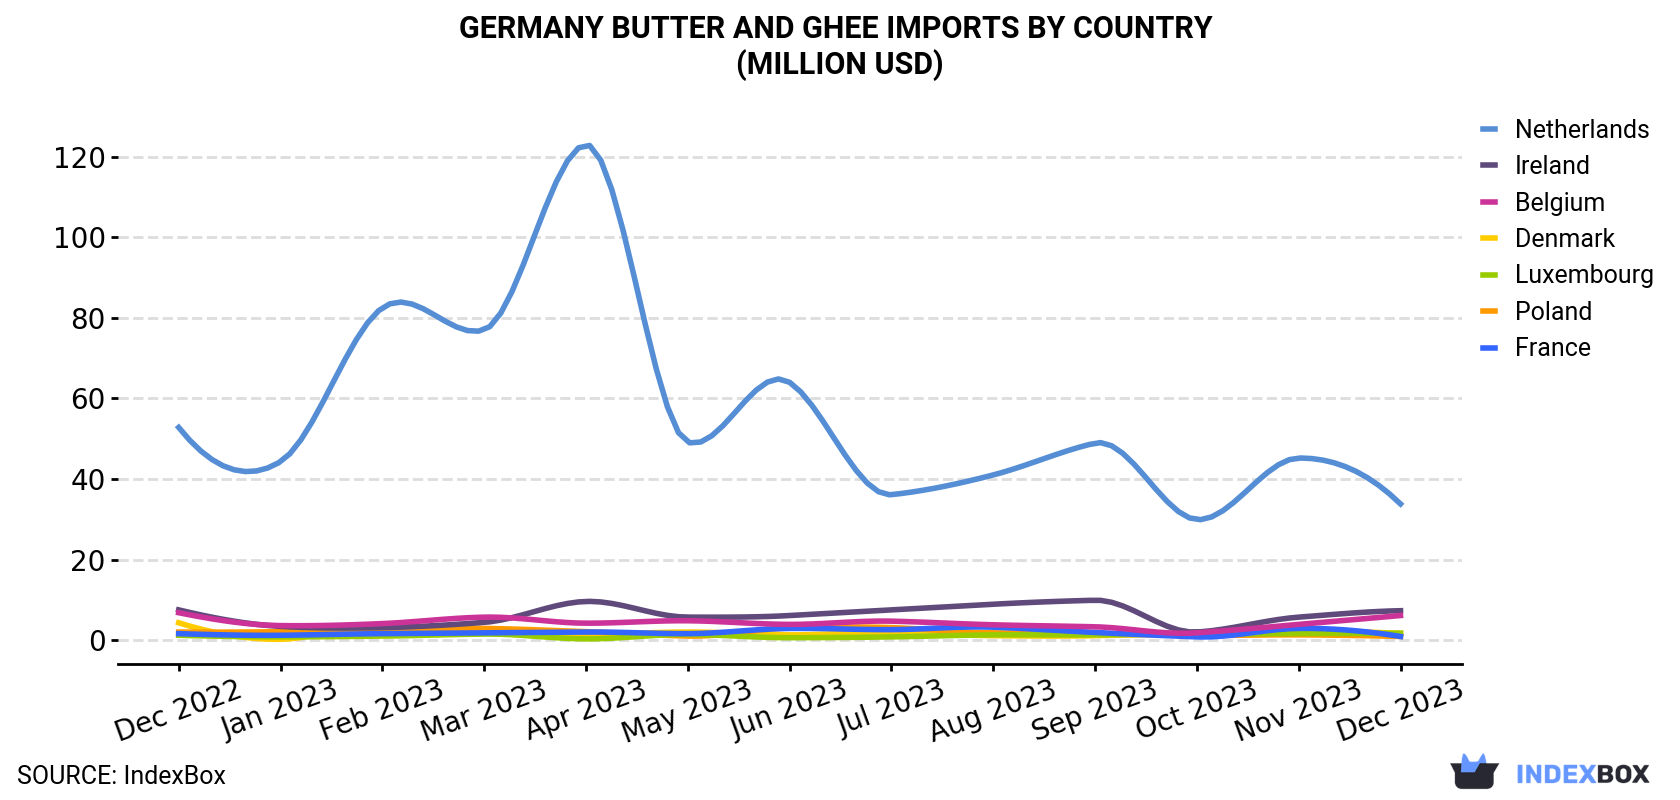 Germany Butter And Ghee Imports By Country (Million USD)